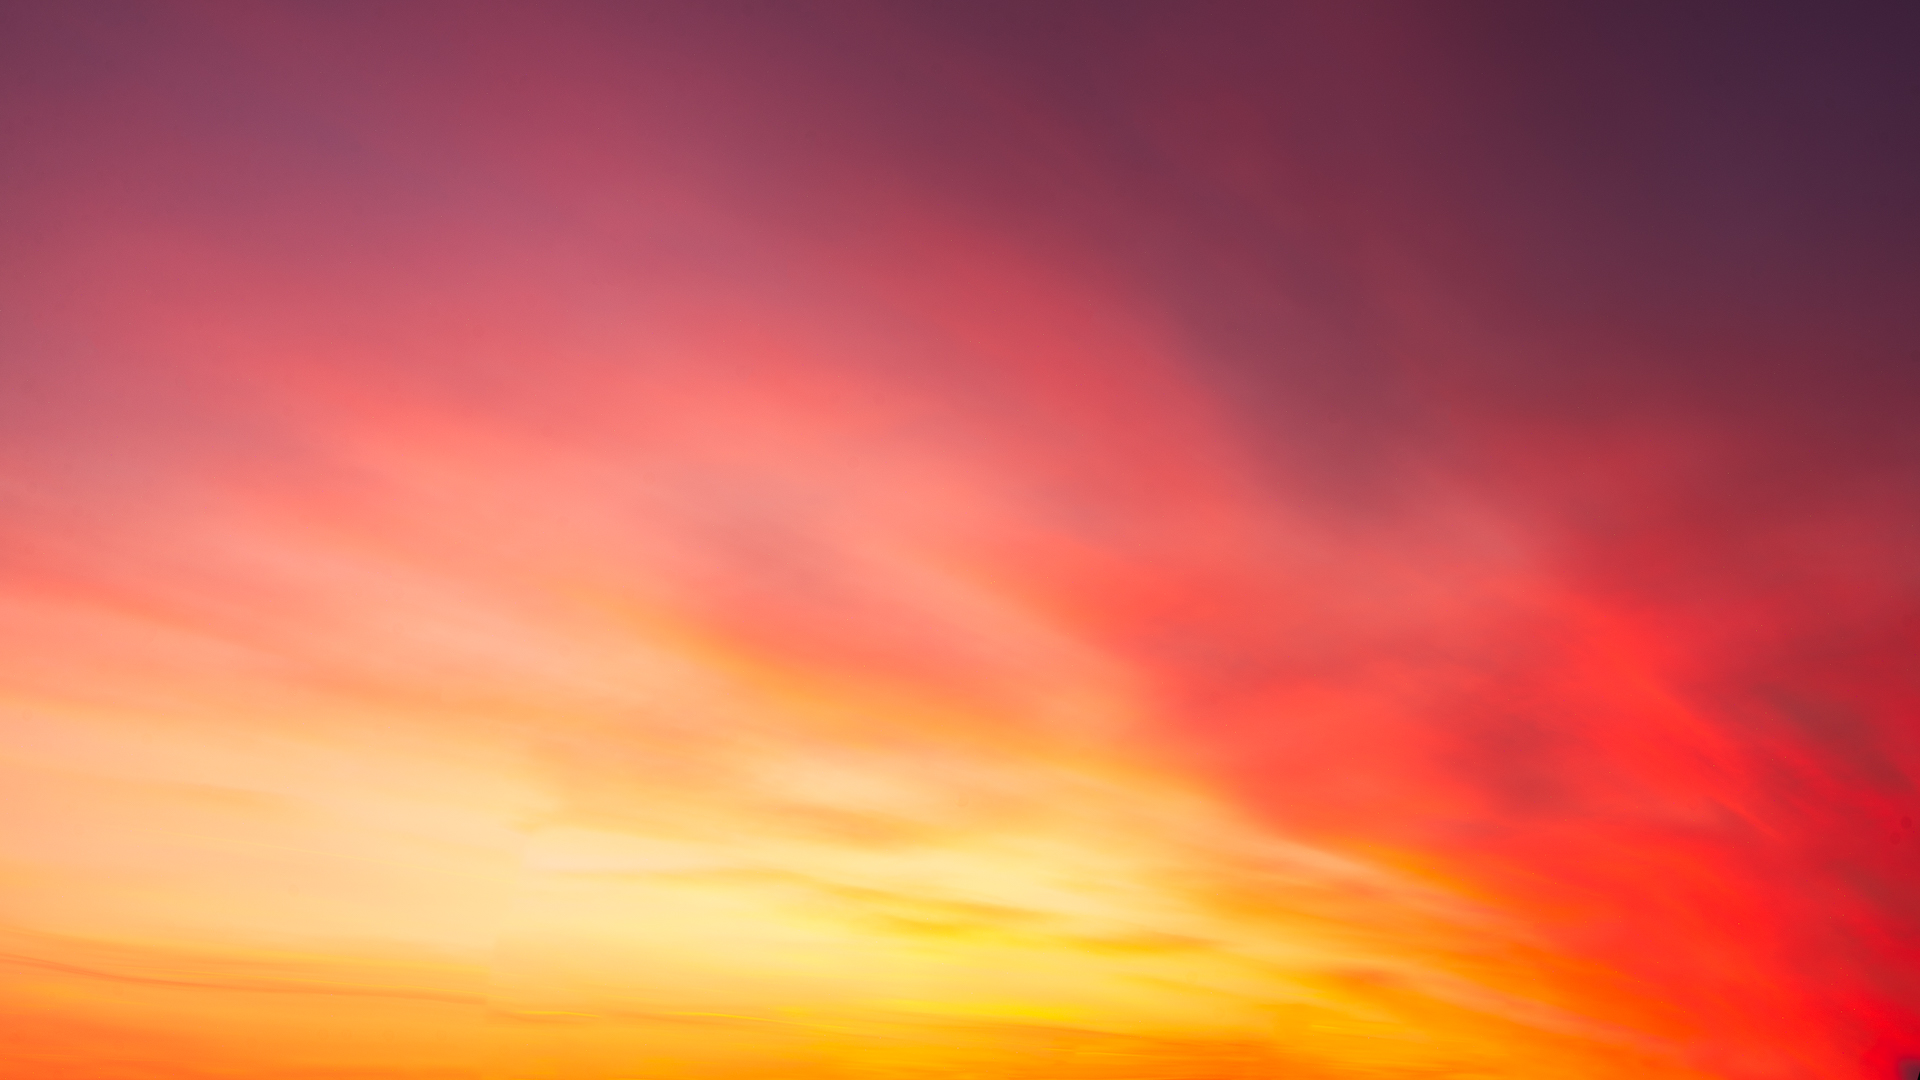 Only Red Clouds - Minimalist Sunset...